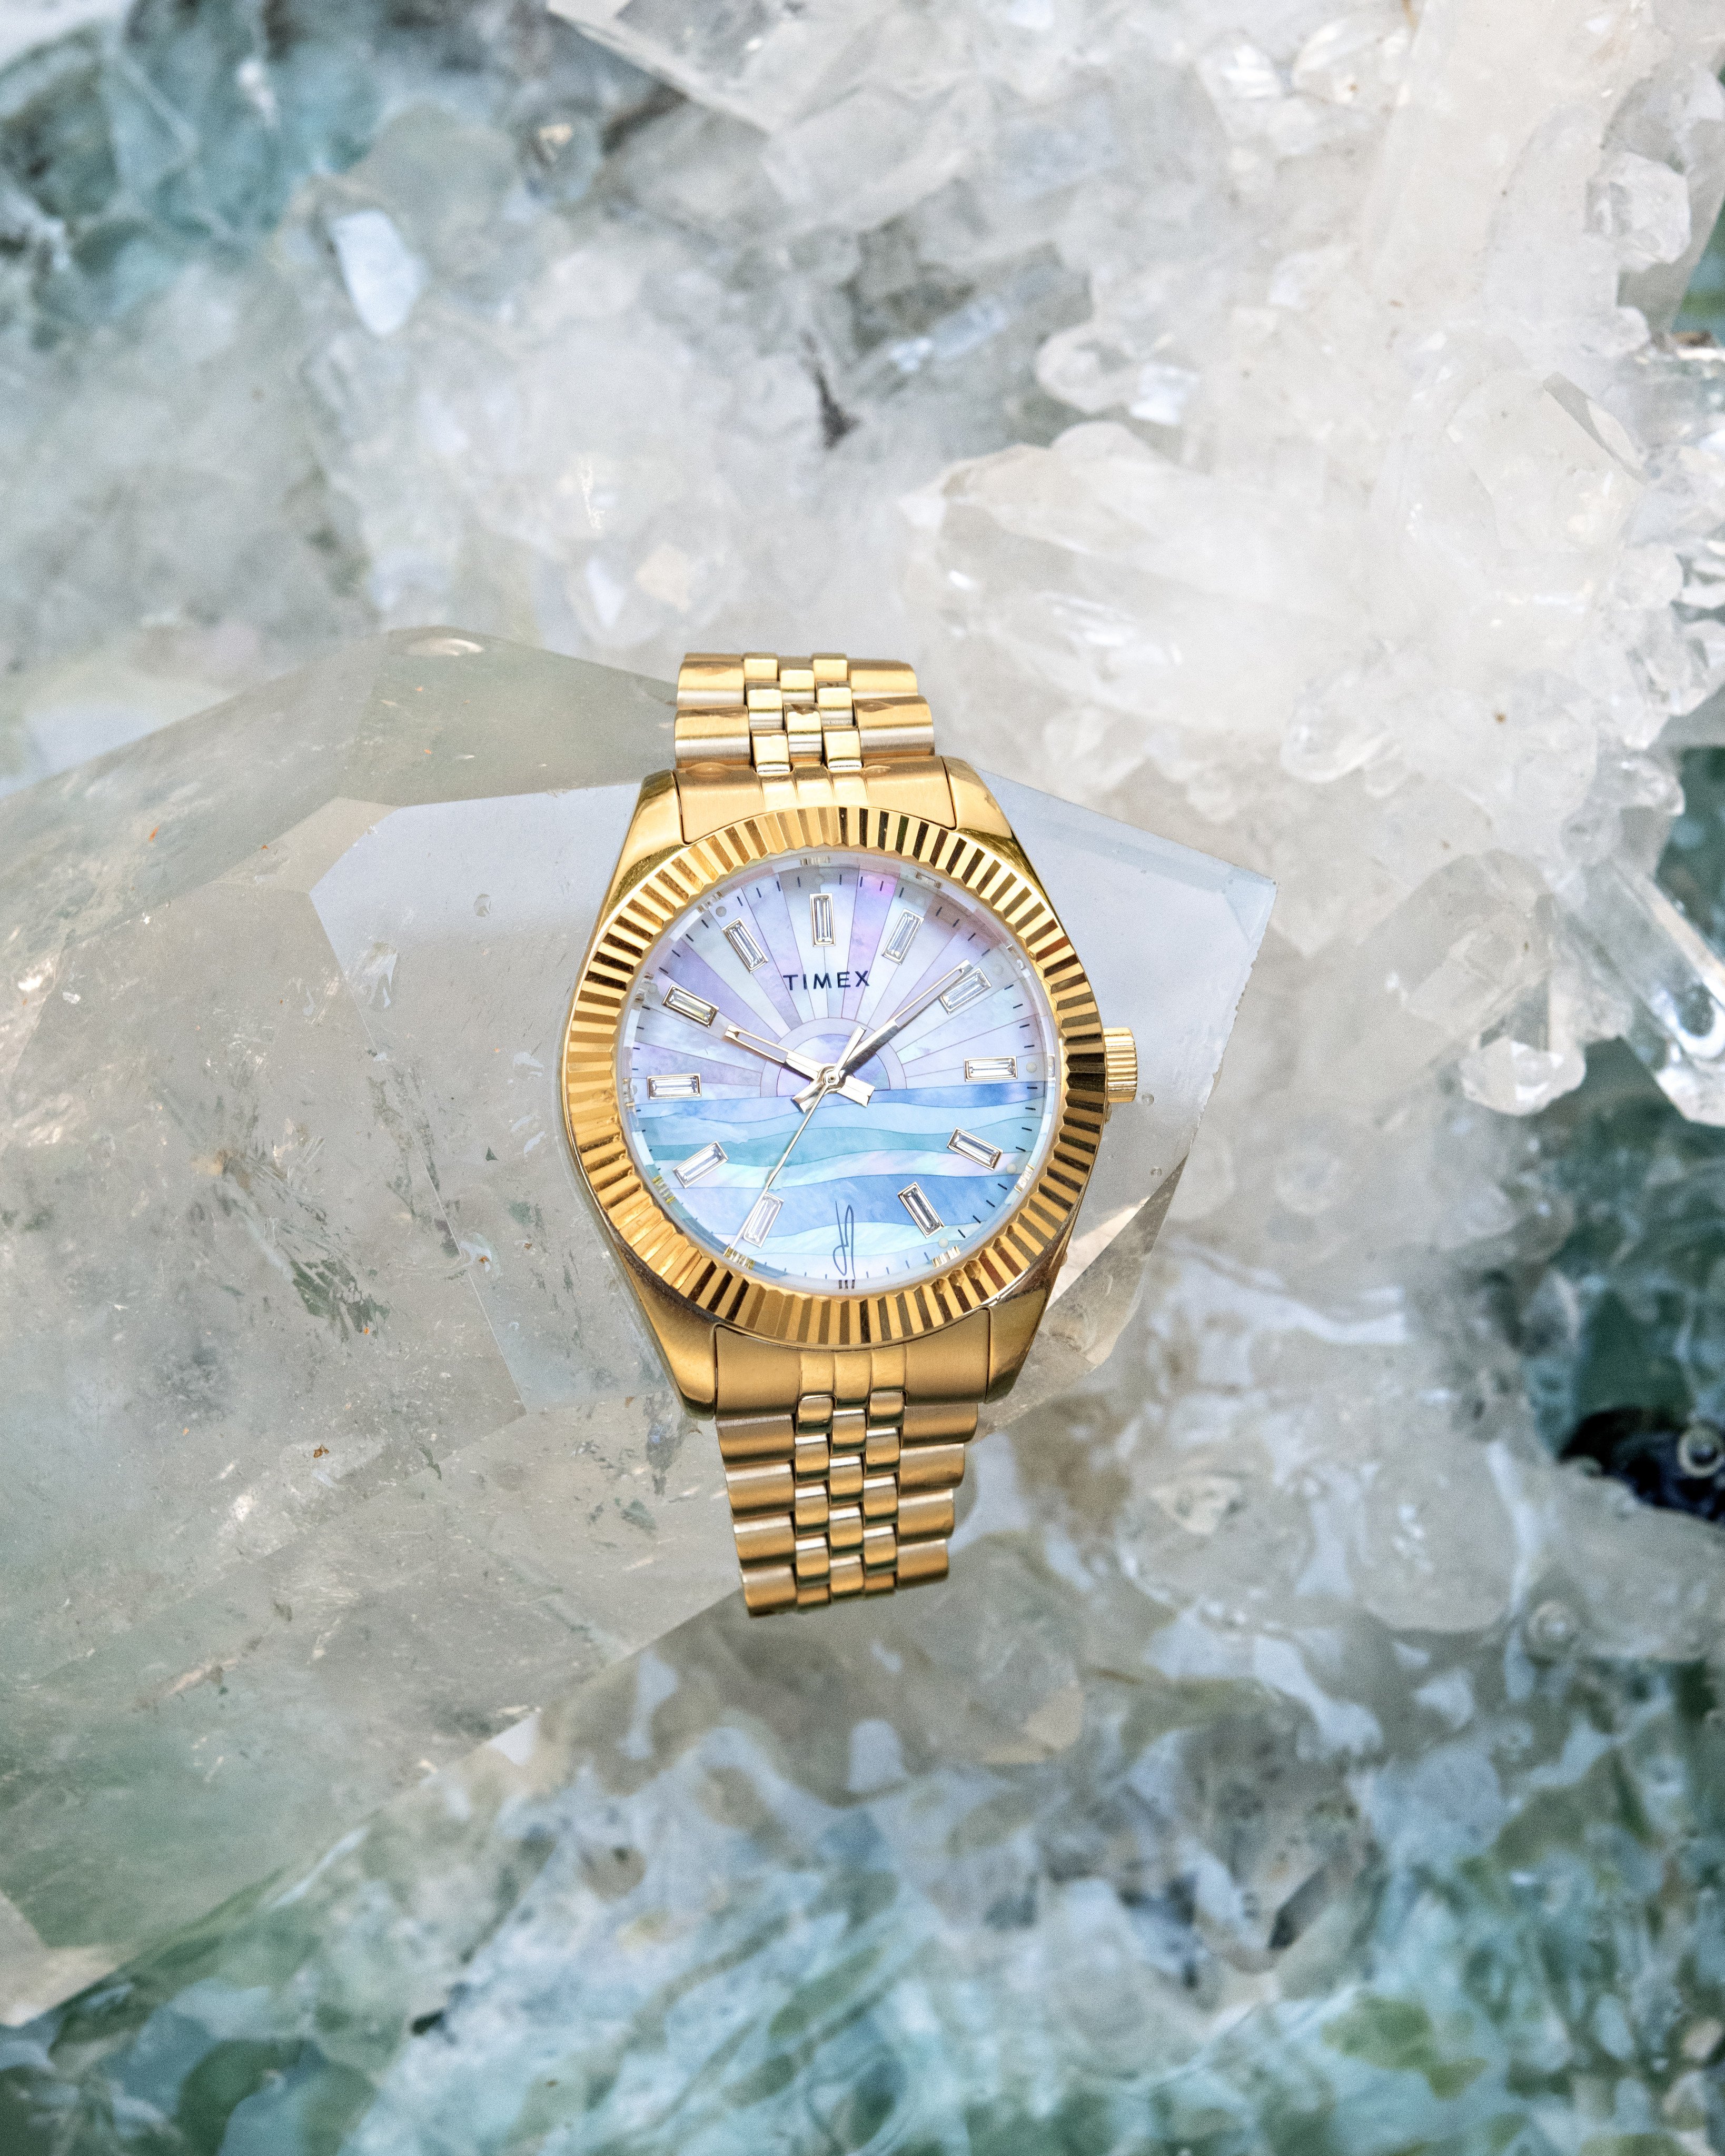 Putting the fun in function, fashion watches are having a moment, such as this product of the recent Timex and Jacquie Aiche collaboration. Photo: Handout